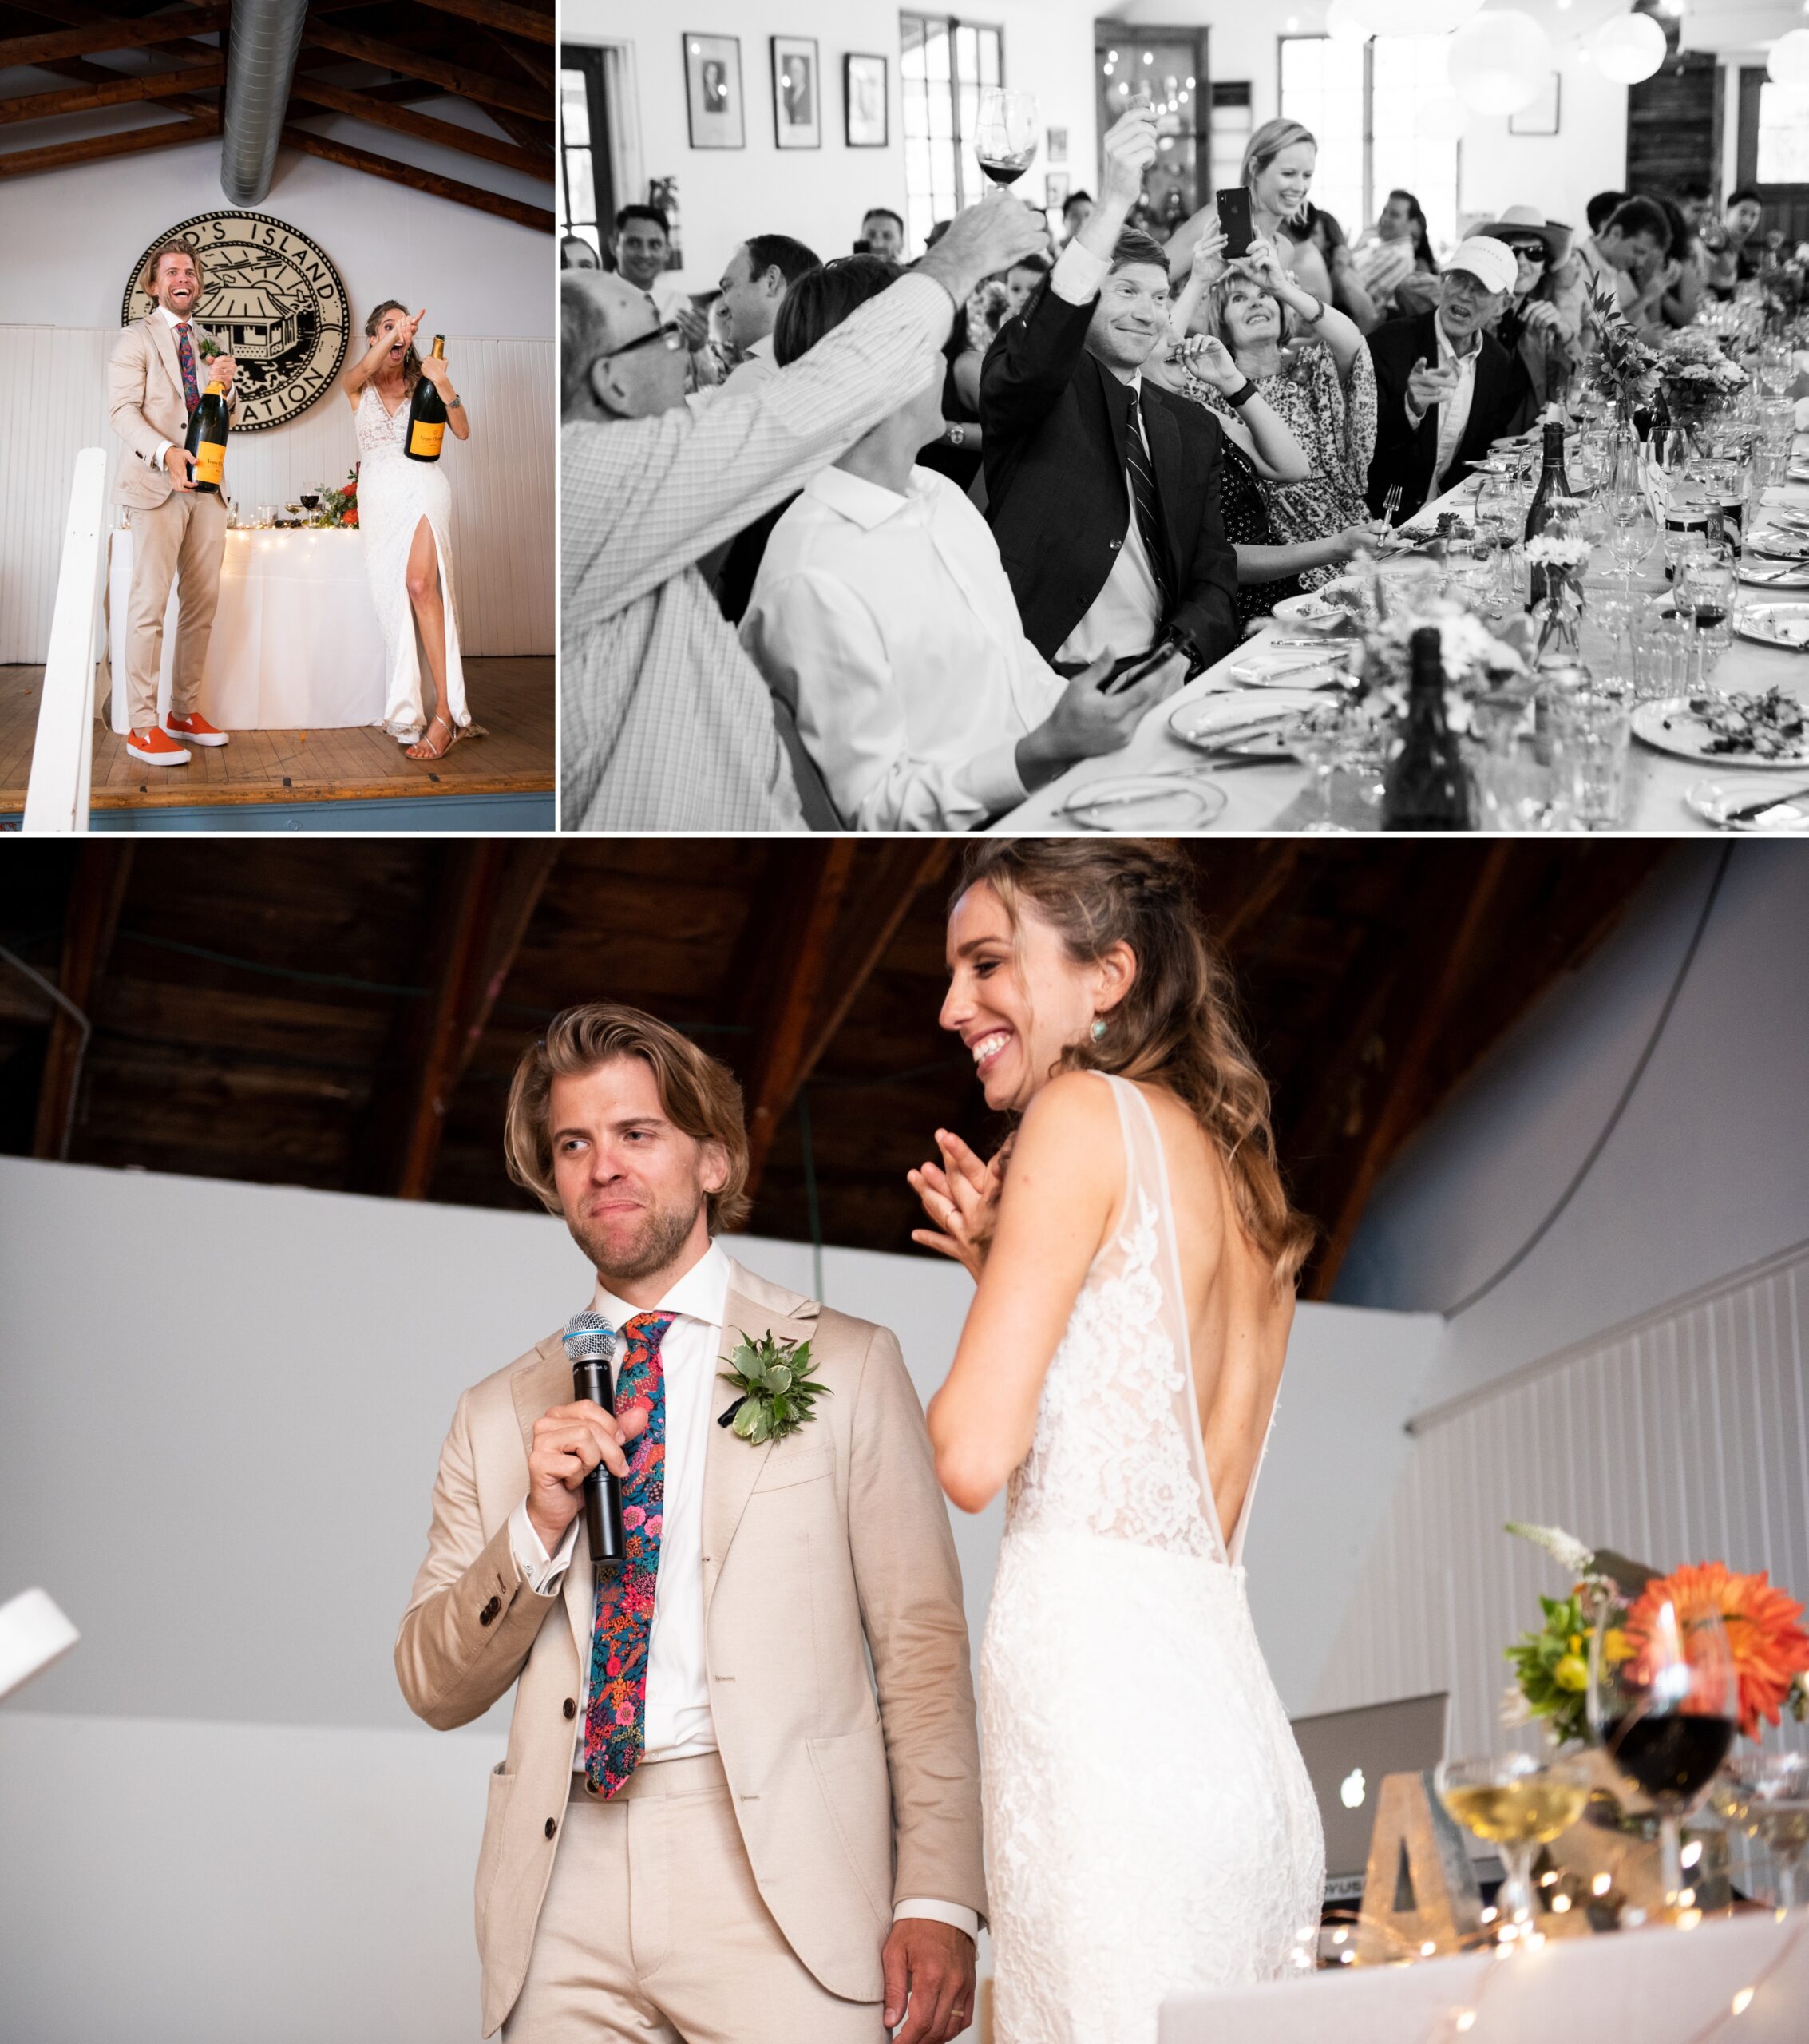 Wedding reception, Couple opens big champagne bottles, Guest catches cork, bride and grooms speech